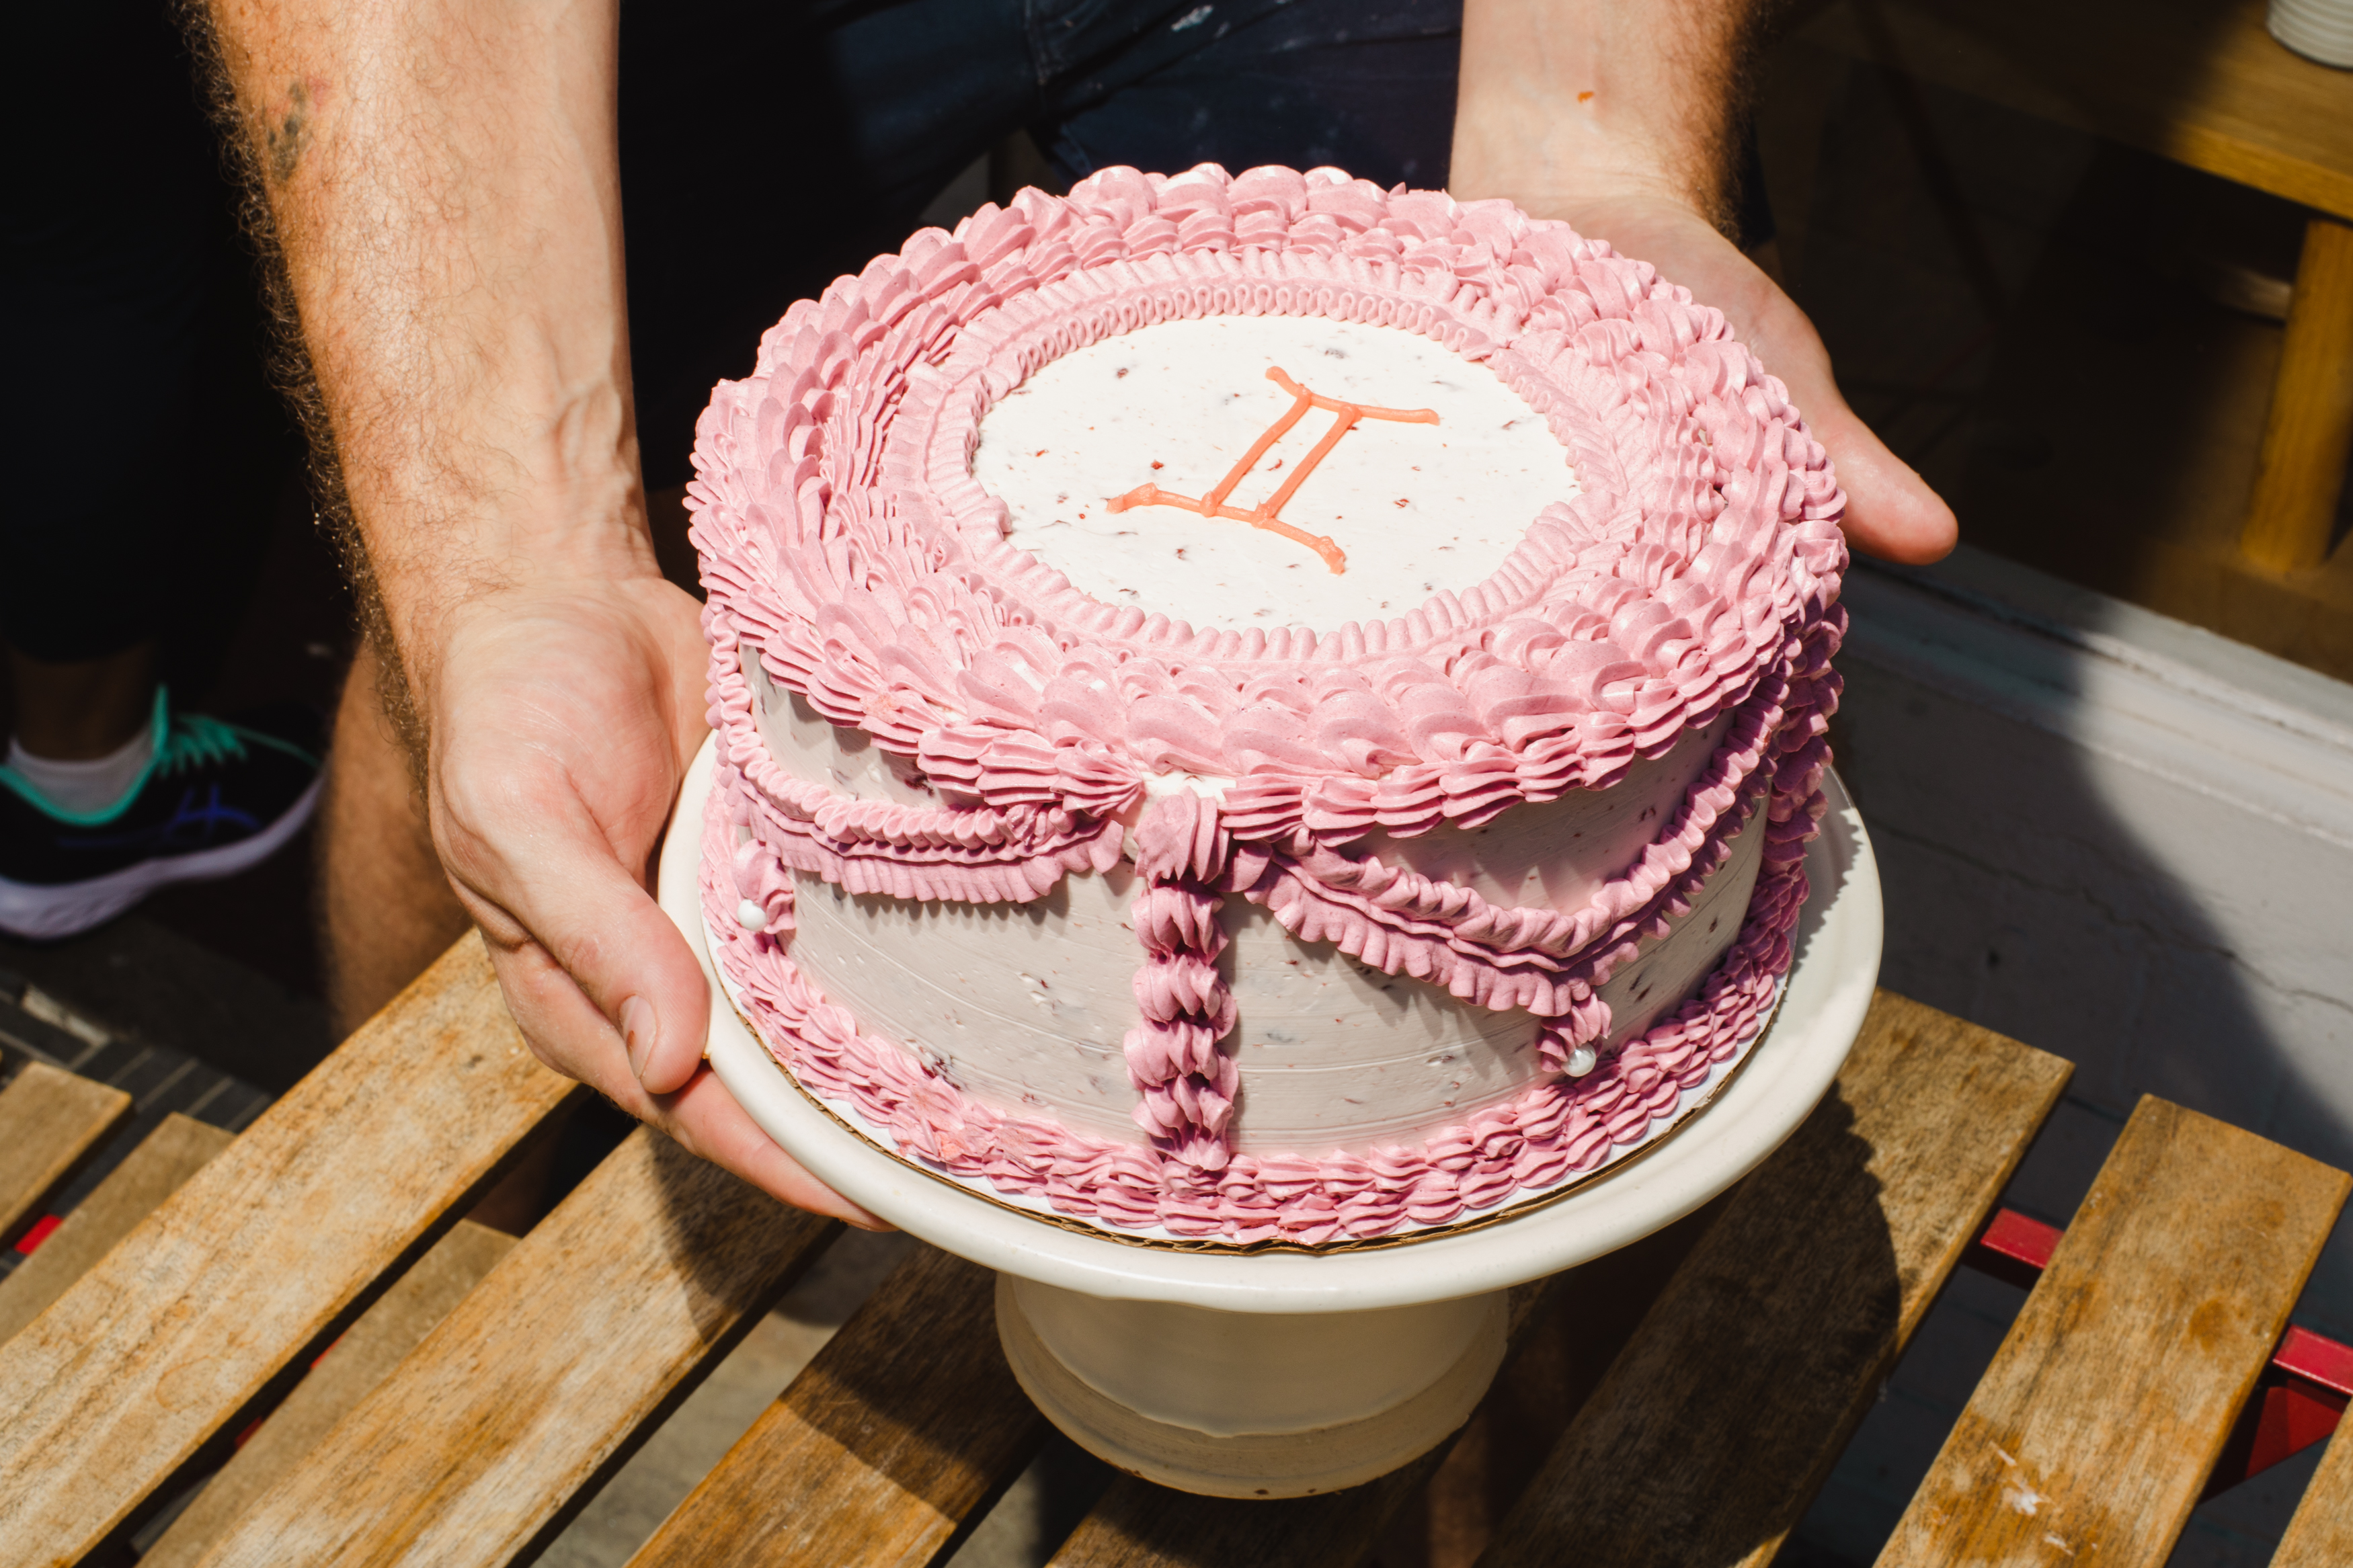 A birthday cake with pink trim.